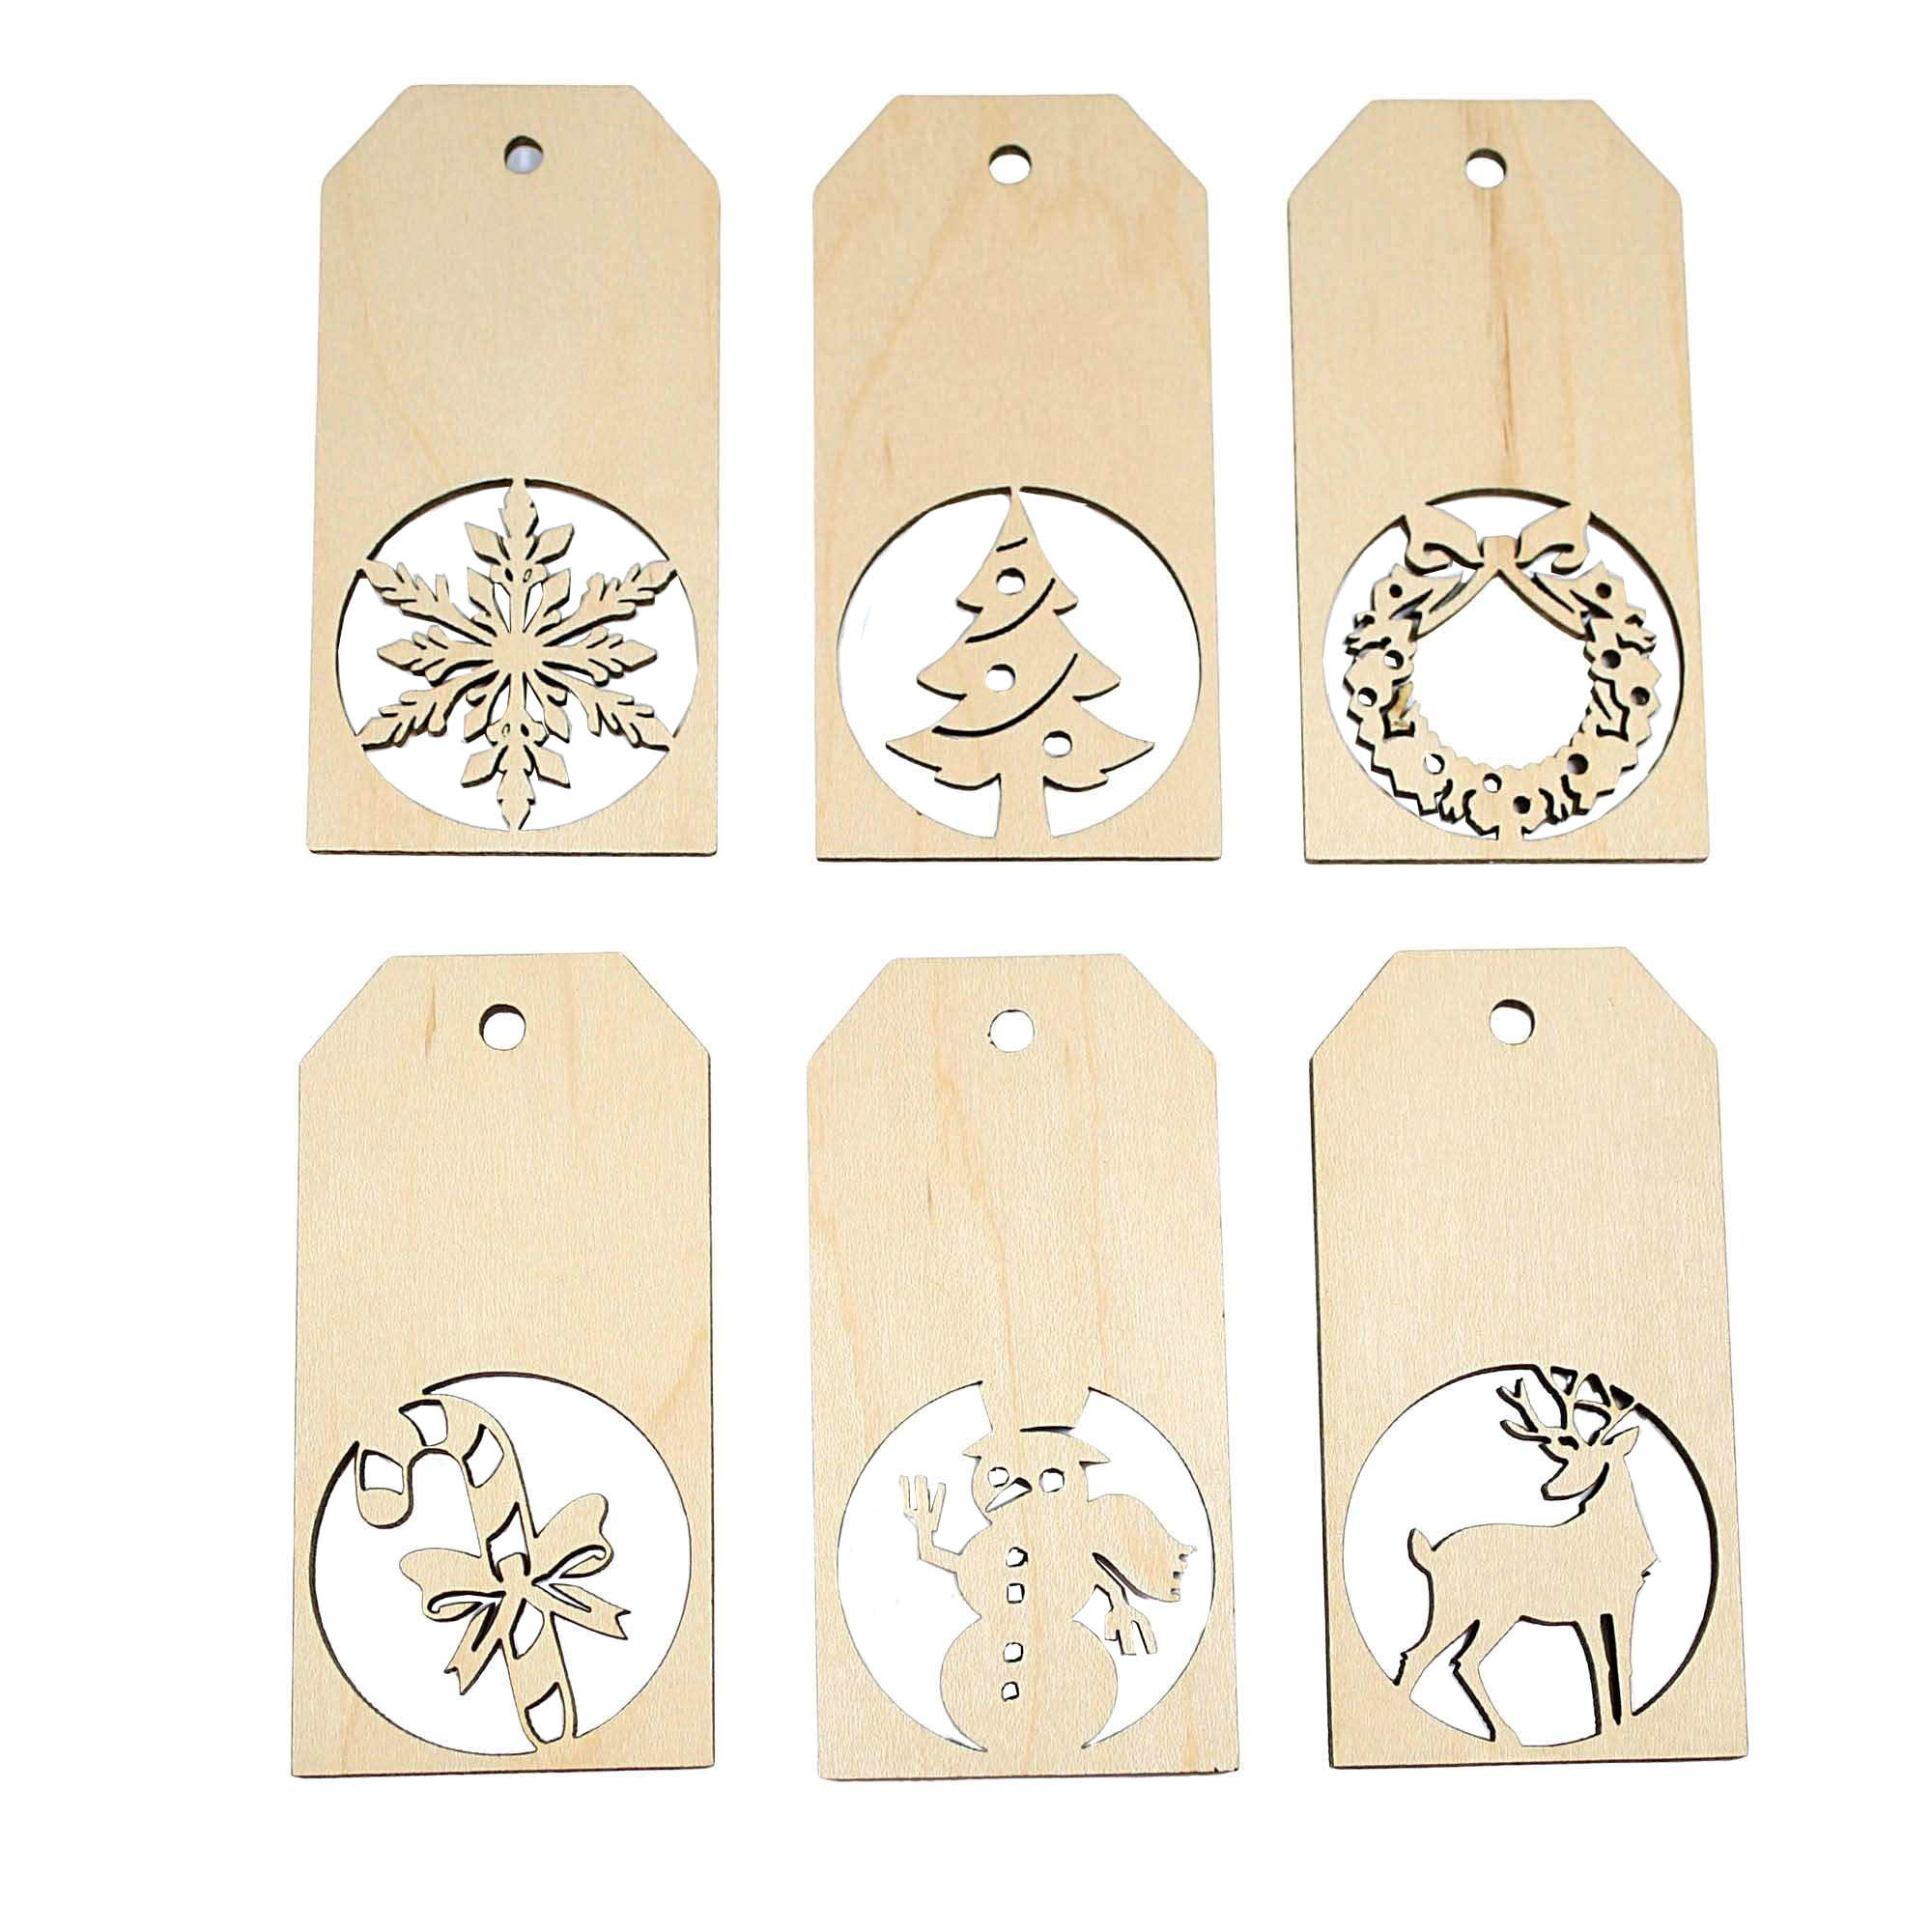 Wooden snowflake gift tag pack of 5